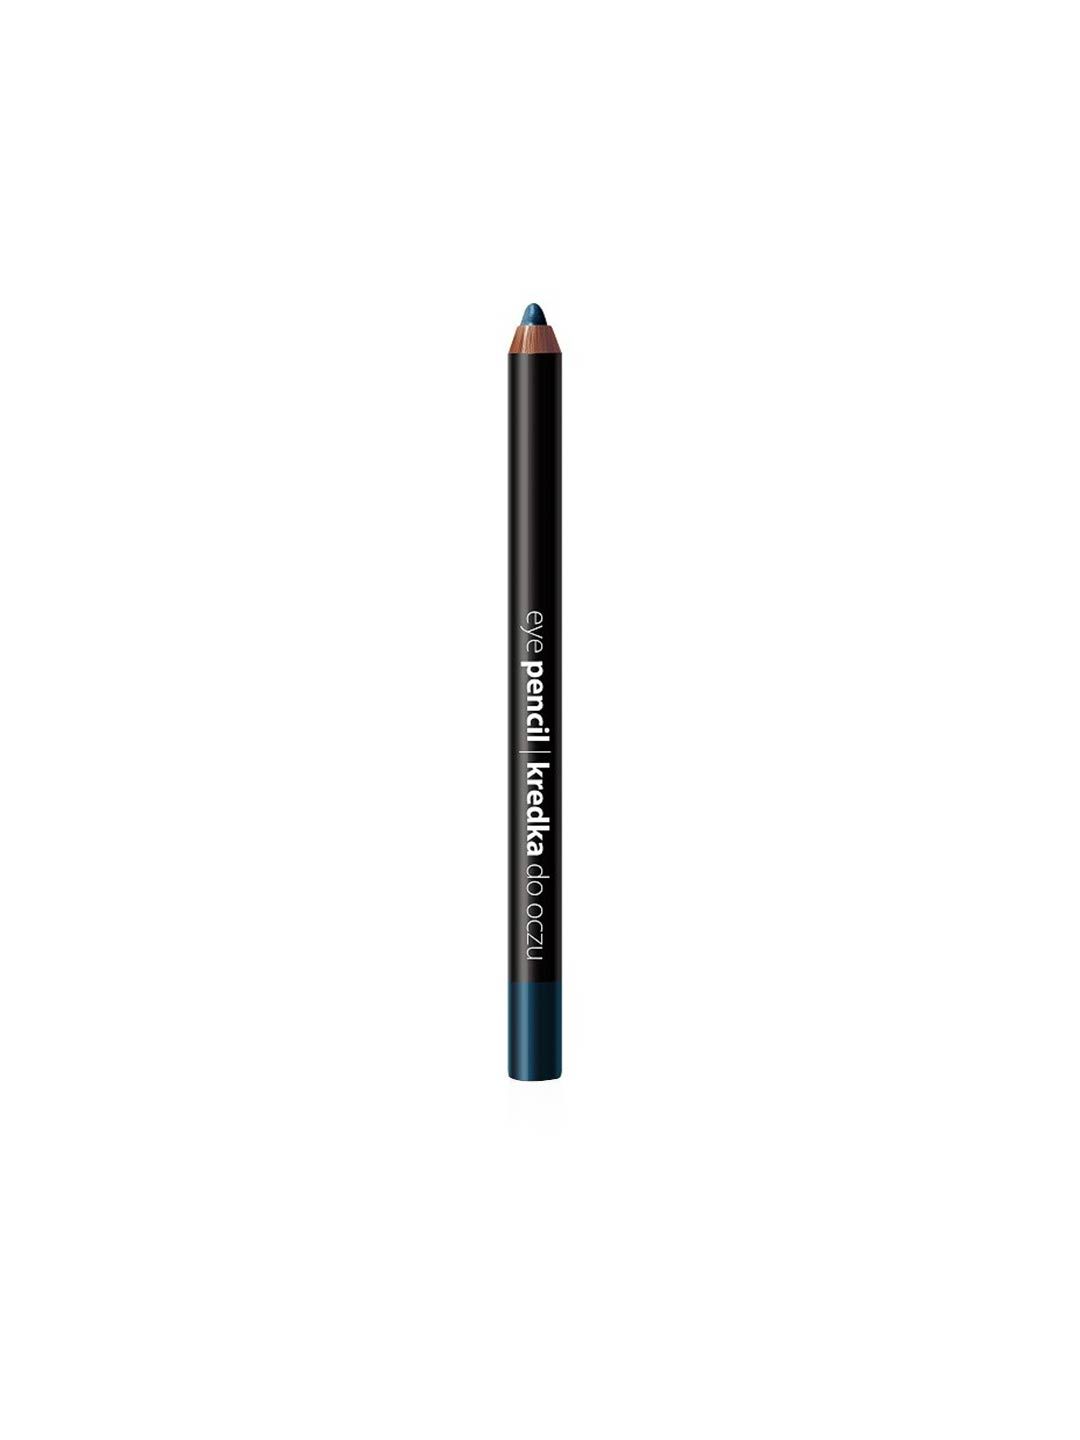 Paese Cosmetics Soft Eye Pencil - 04 1.5gm Price in India